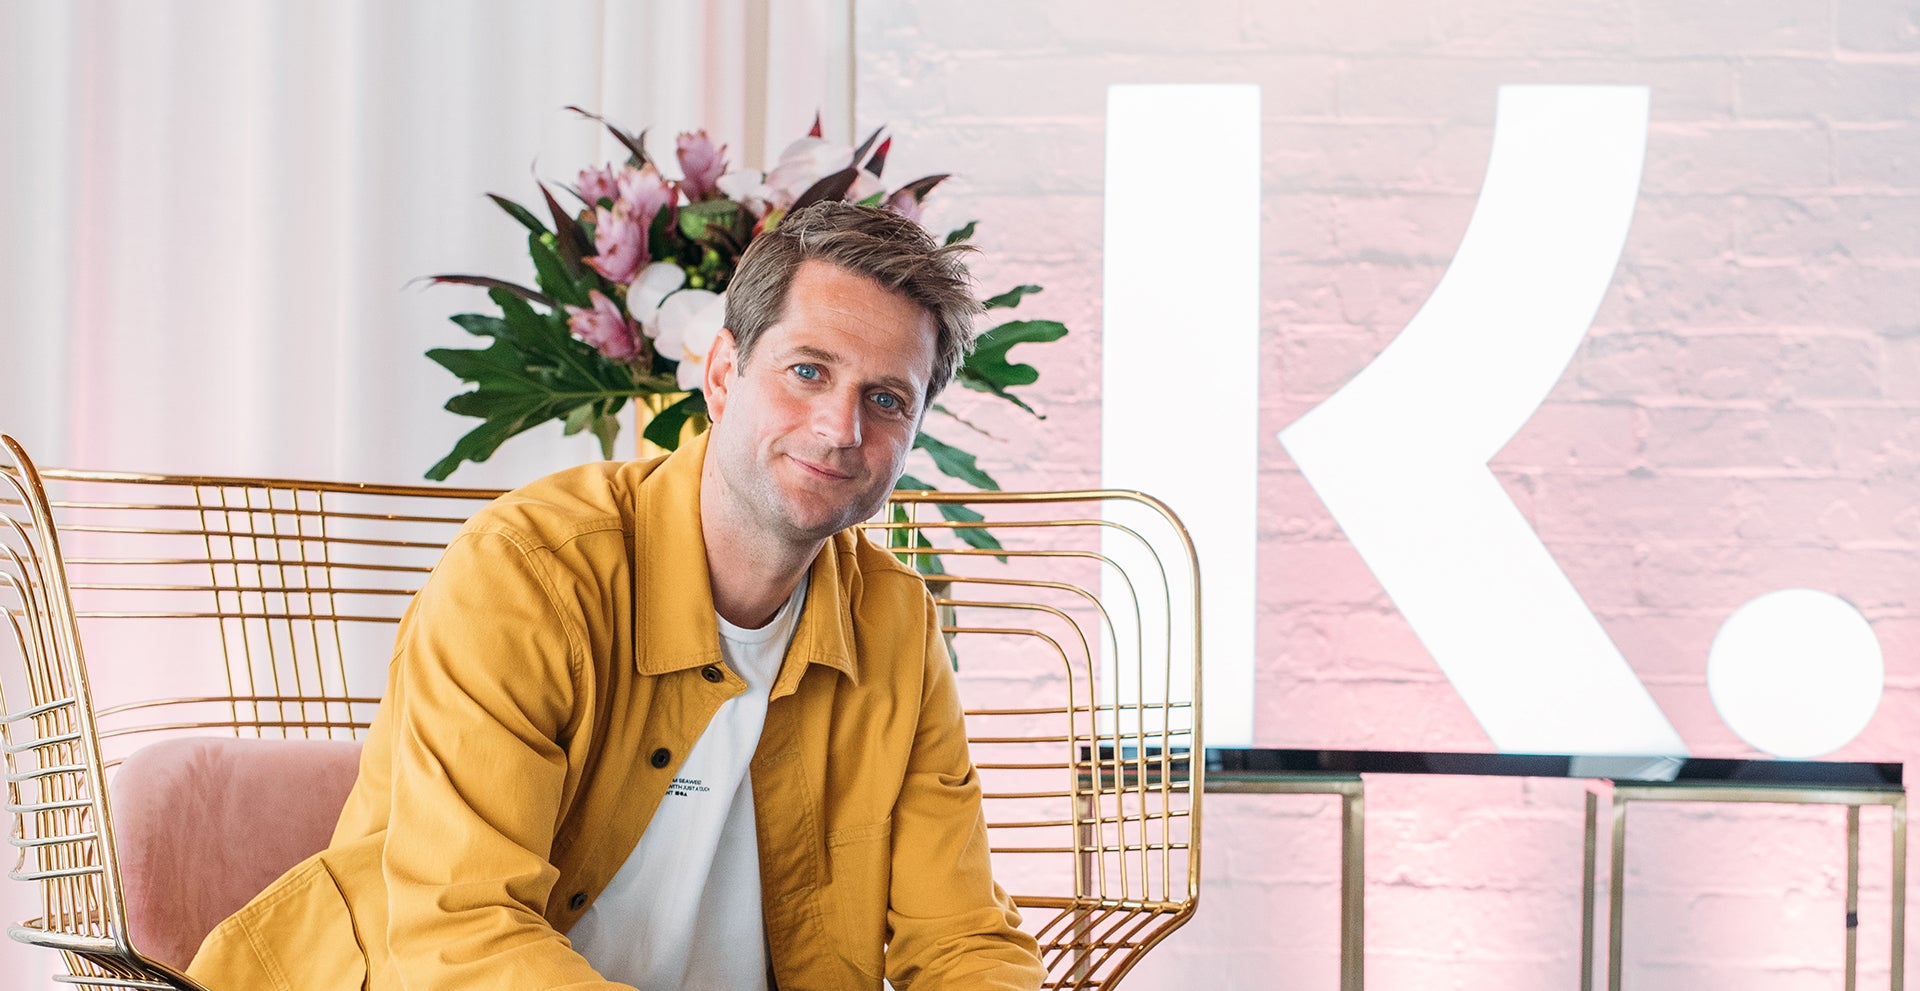 "I’m not a star like Elon Musk" says Klarna CEO, damping IPO rumours